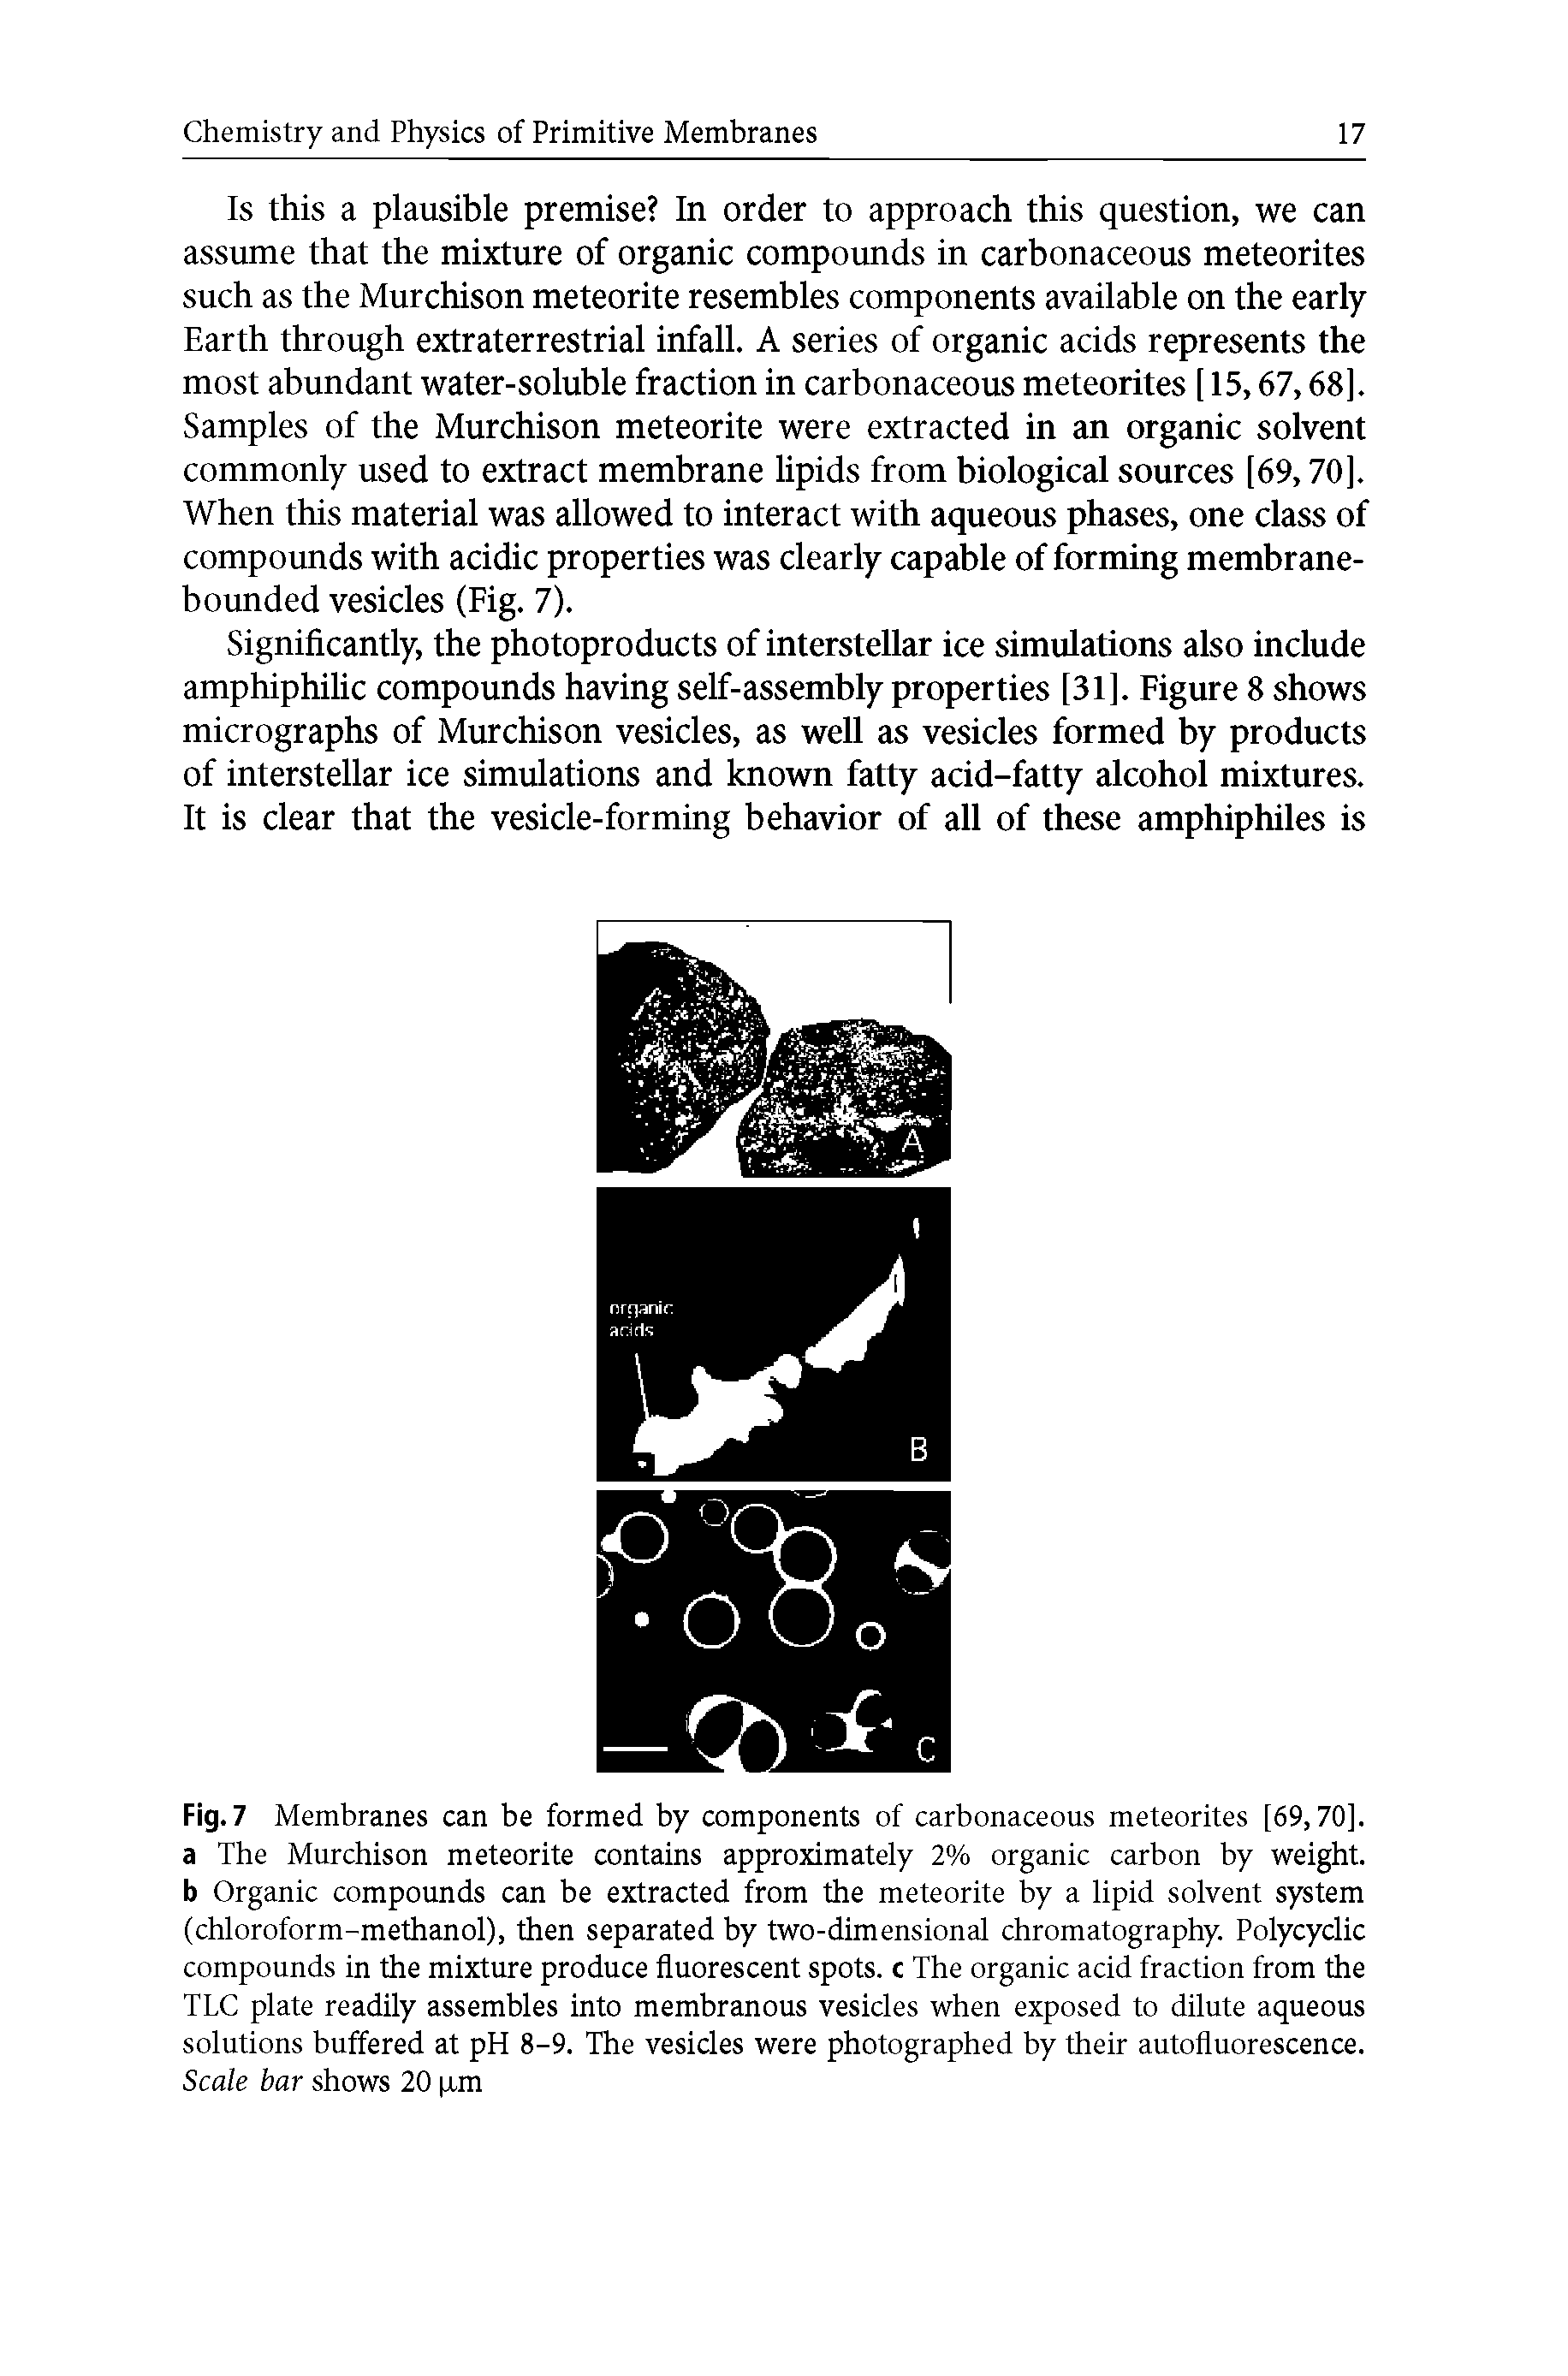 Fig. 7 Membranes can be formed by components of carbonaceous meteorites [69,70]. a The Murchison meteorite contains approximately 2% organic carbon by weight, b Organic compounds can be extracted from the meteorite by a lipid solvent system (chloroform-methanol), then separated by two-dimensional chromatography. Polycyclic compounds in the mixture produce fluorescent spots, c The organic acid fraction from the TLC plate readily assembles into membranous vesicles when exposed to dilute aqueous solutions buffered at pH 8-9. The vesicles were photographed by their autofluorescence. Scale bar shows 20 im...